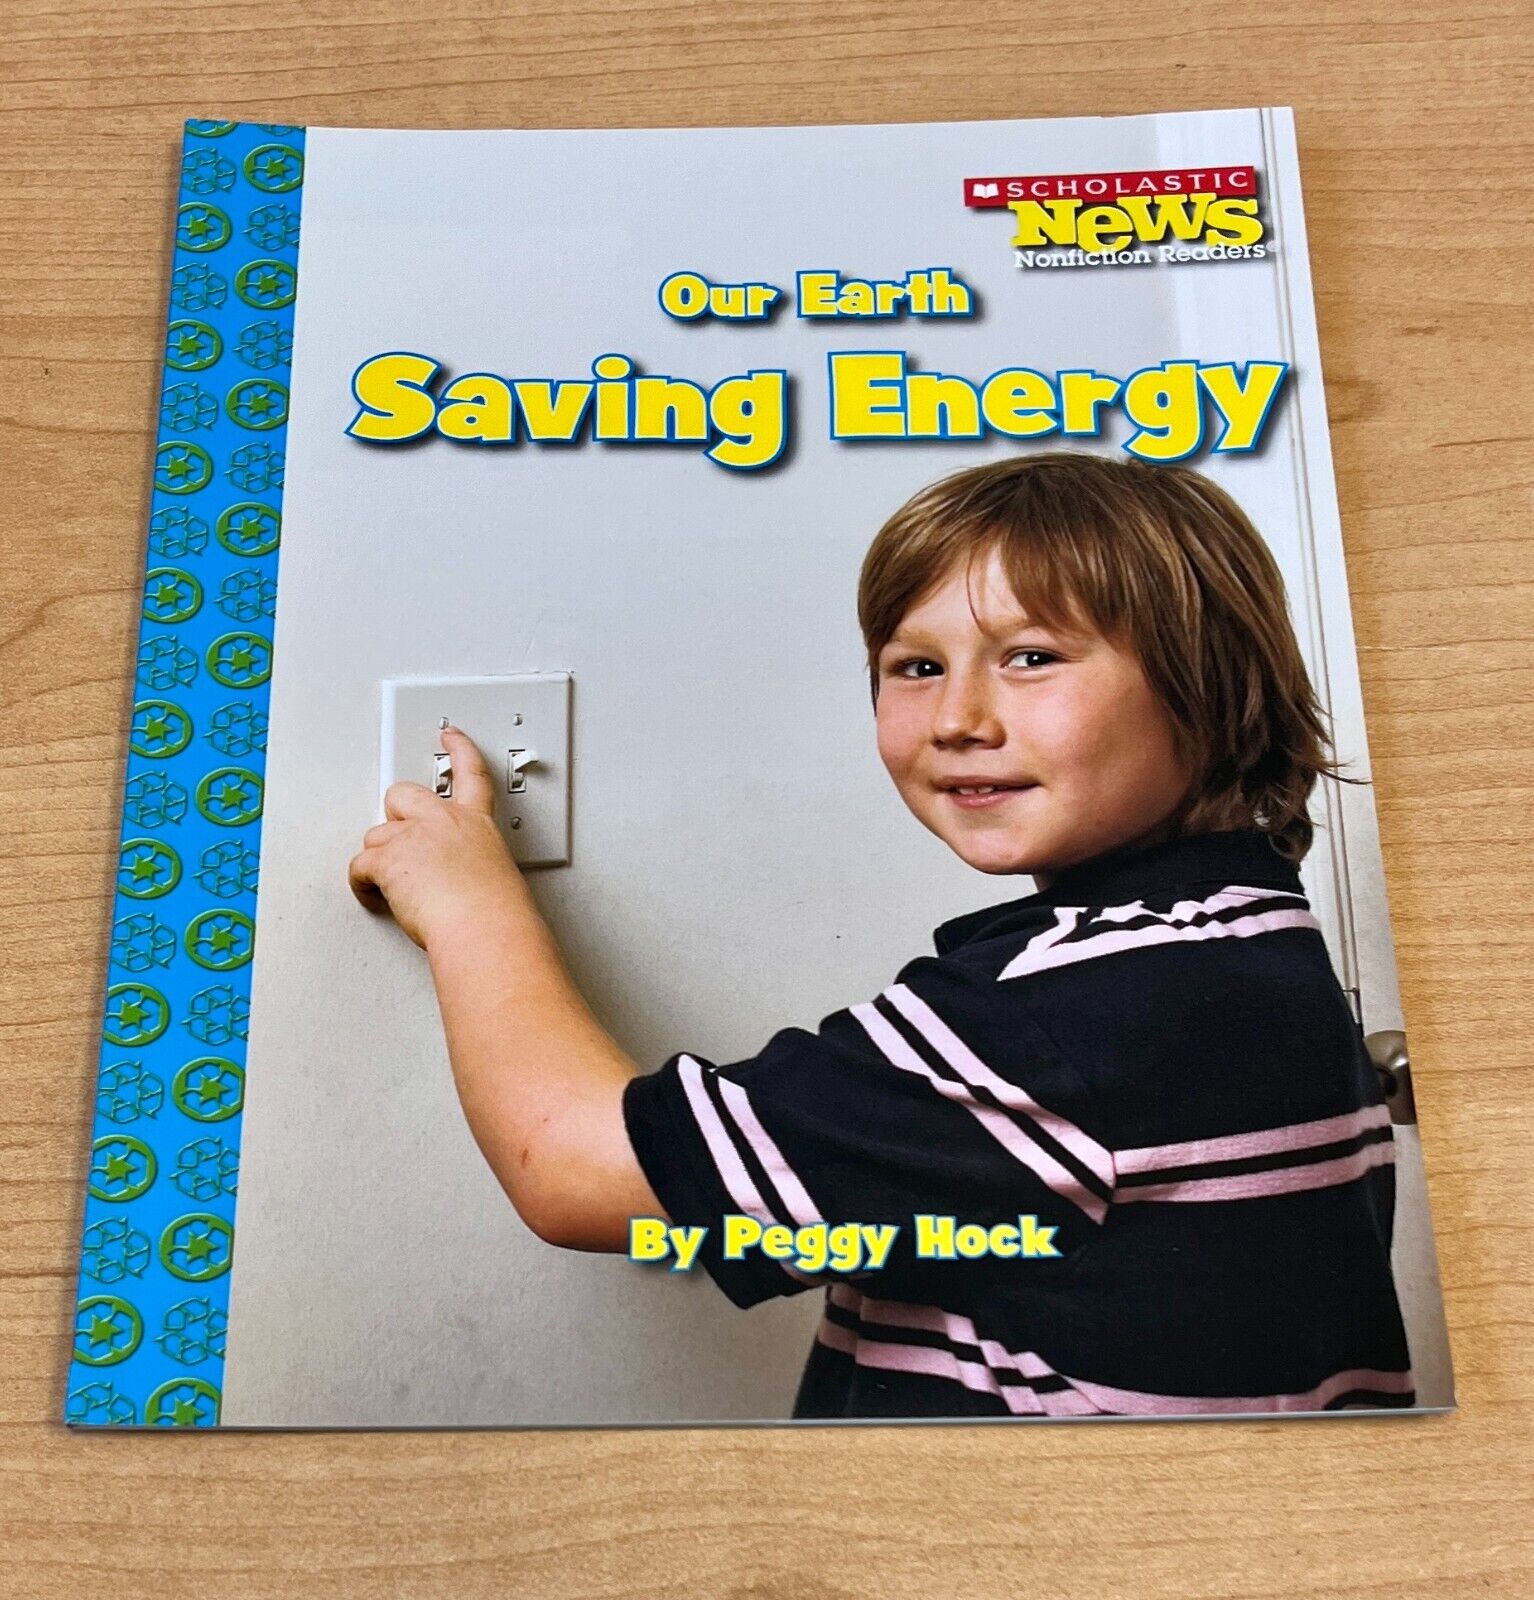 LOT of 7 - Our Earth: Saving Energy  Scholastic News Peggy Hock